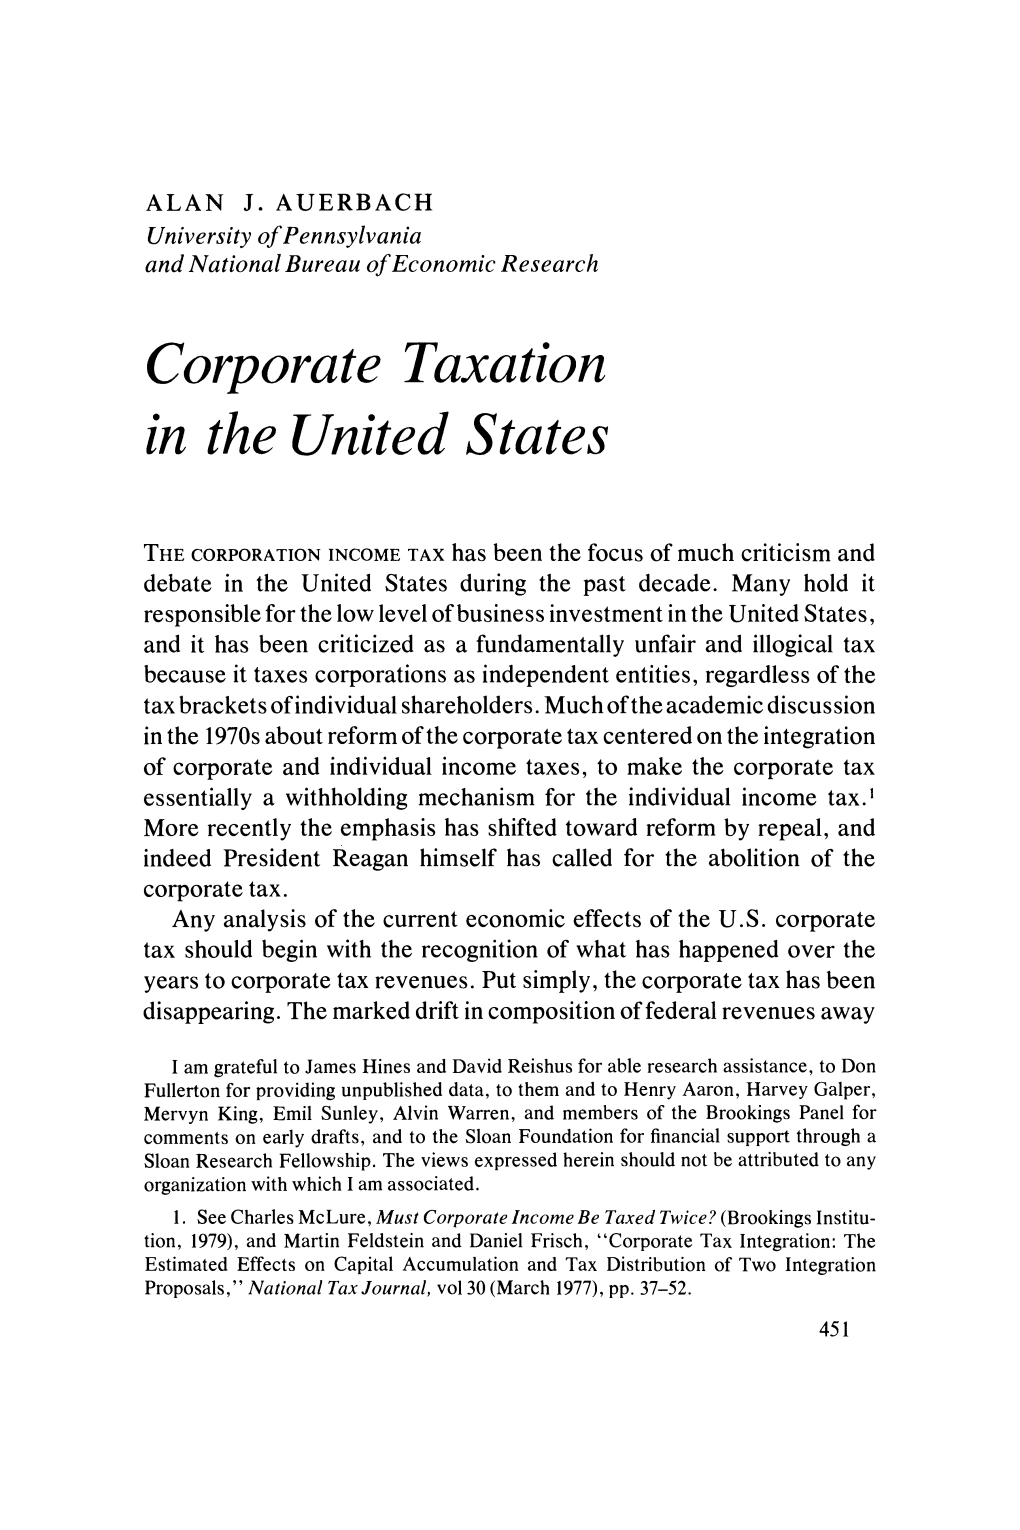 Corporate Taxation in the United States